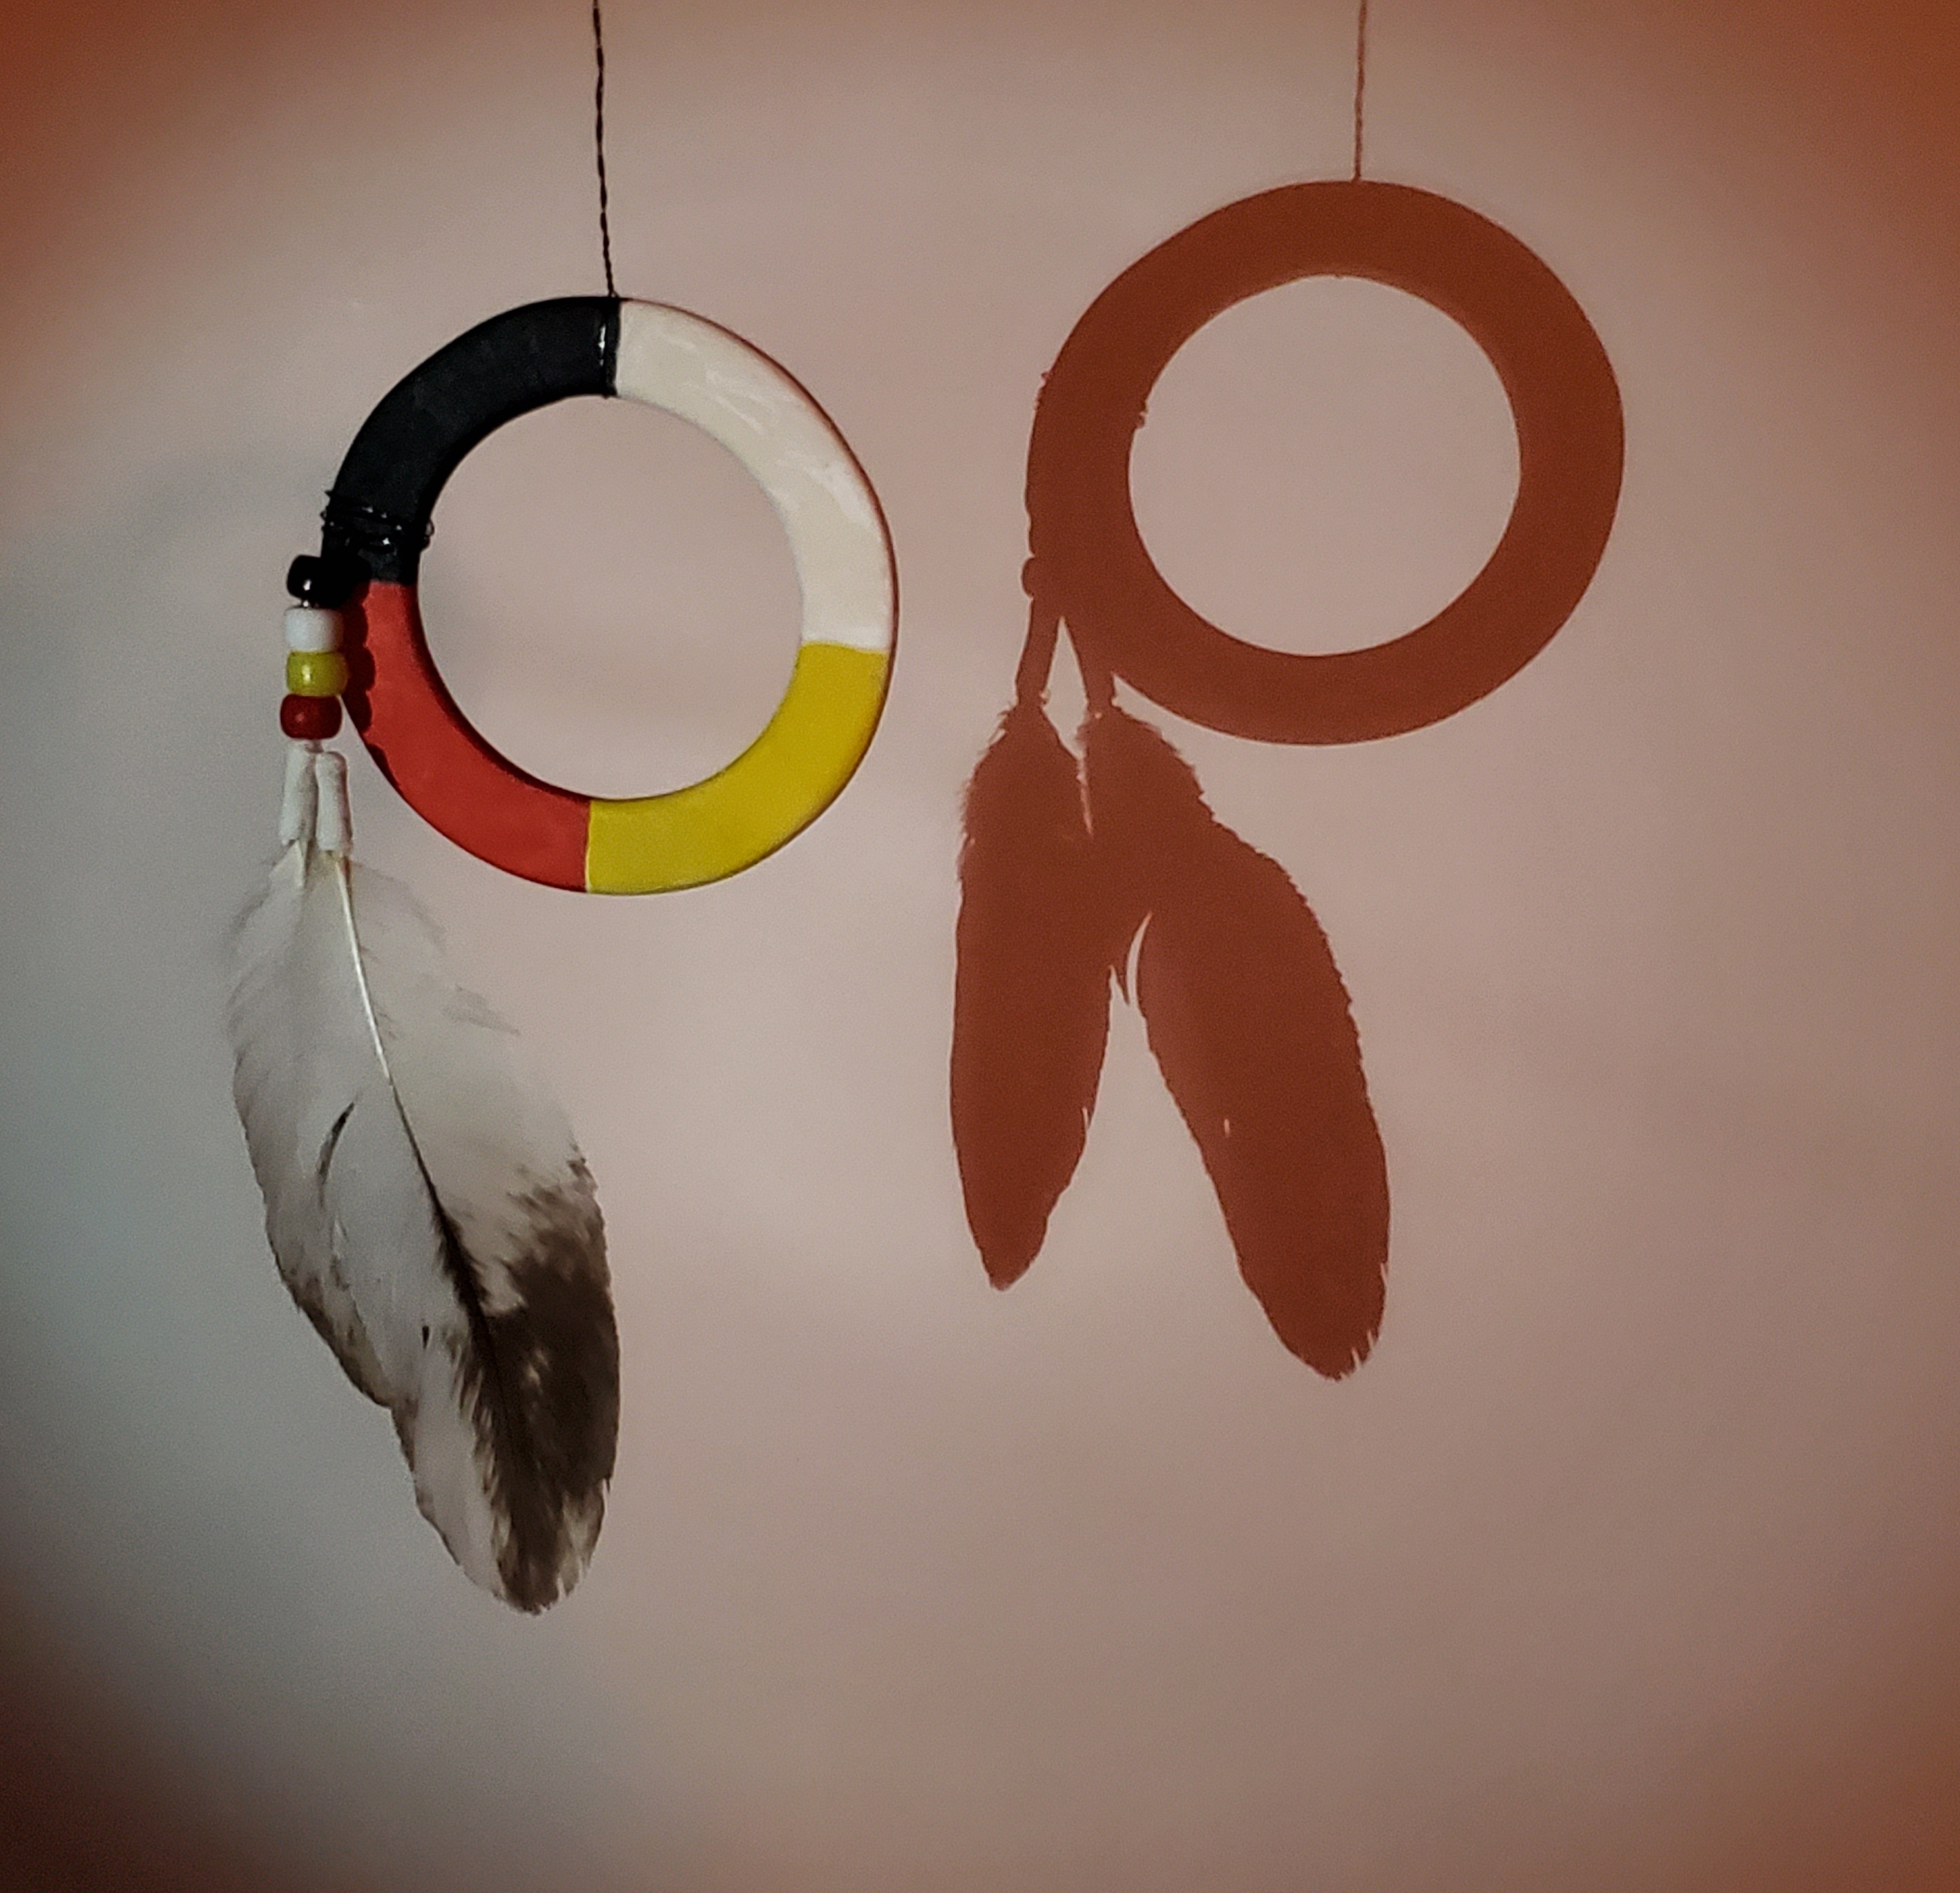 The letter 'R', made by a Medicine Wheel